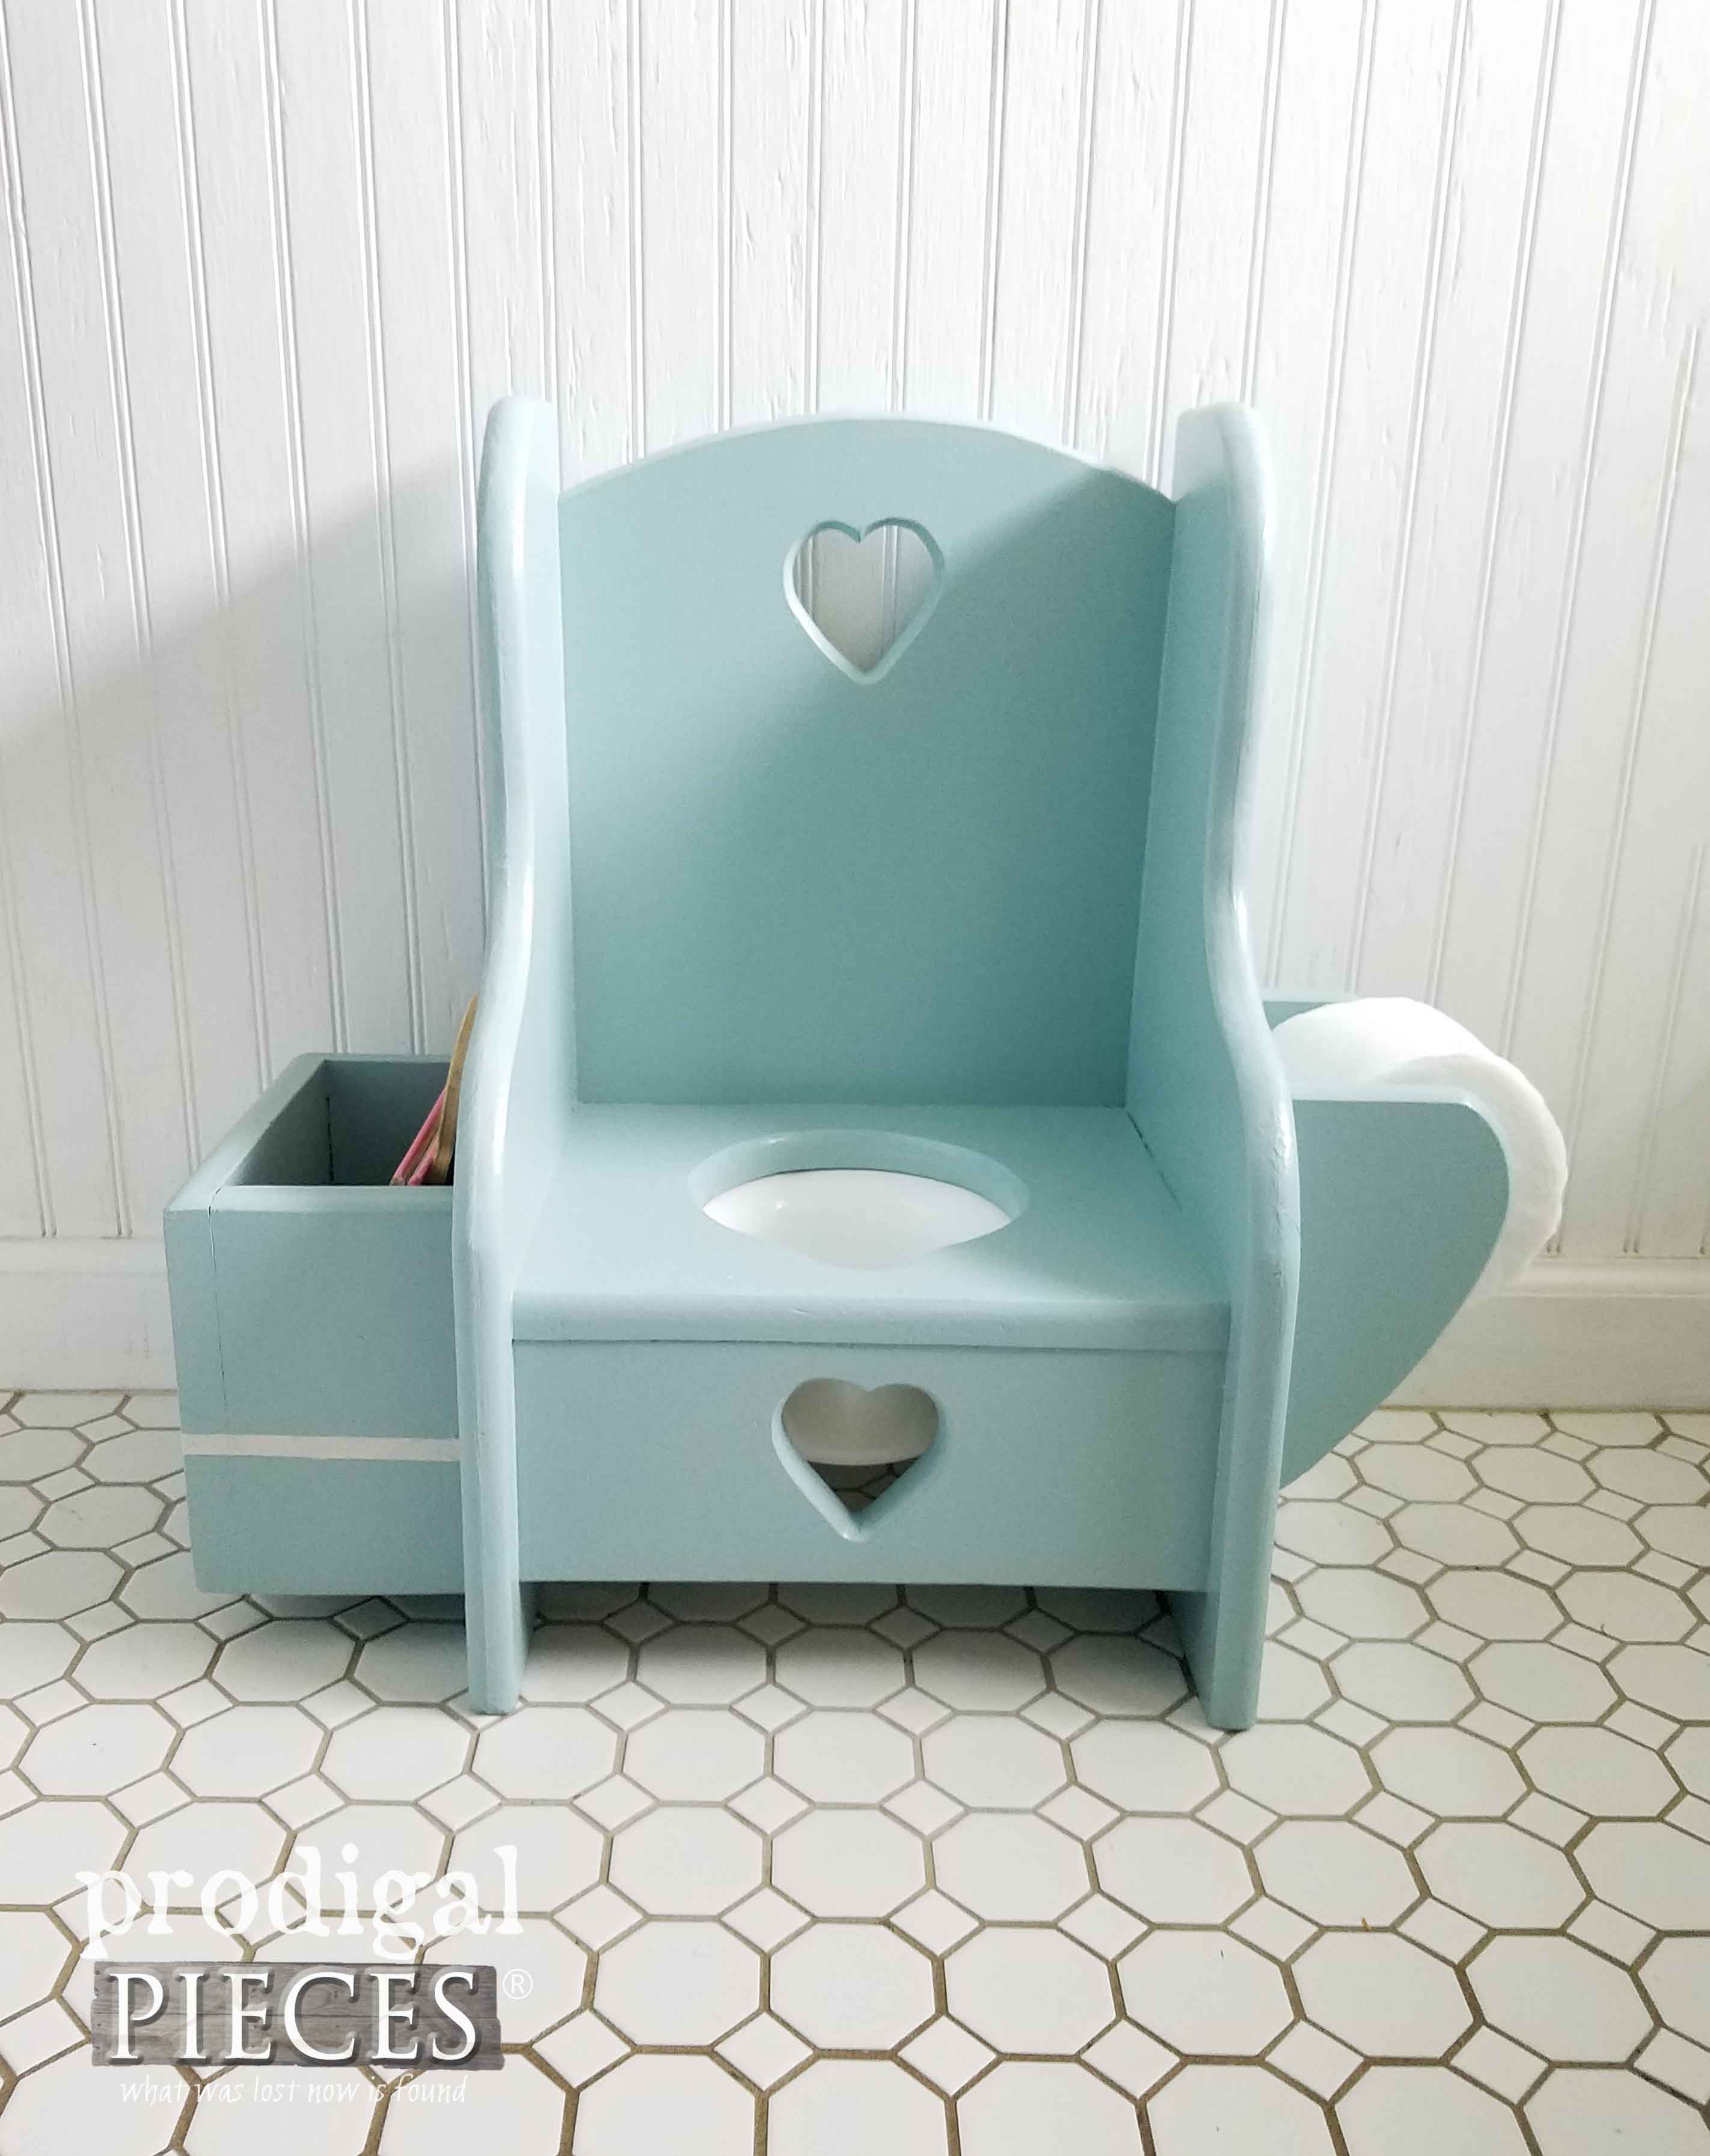 Potty Training Made fun with this Vintage Potty Chair Makeover by Prodigal Pieces | prodigalpieces.com